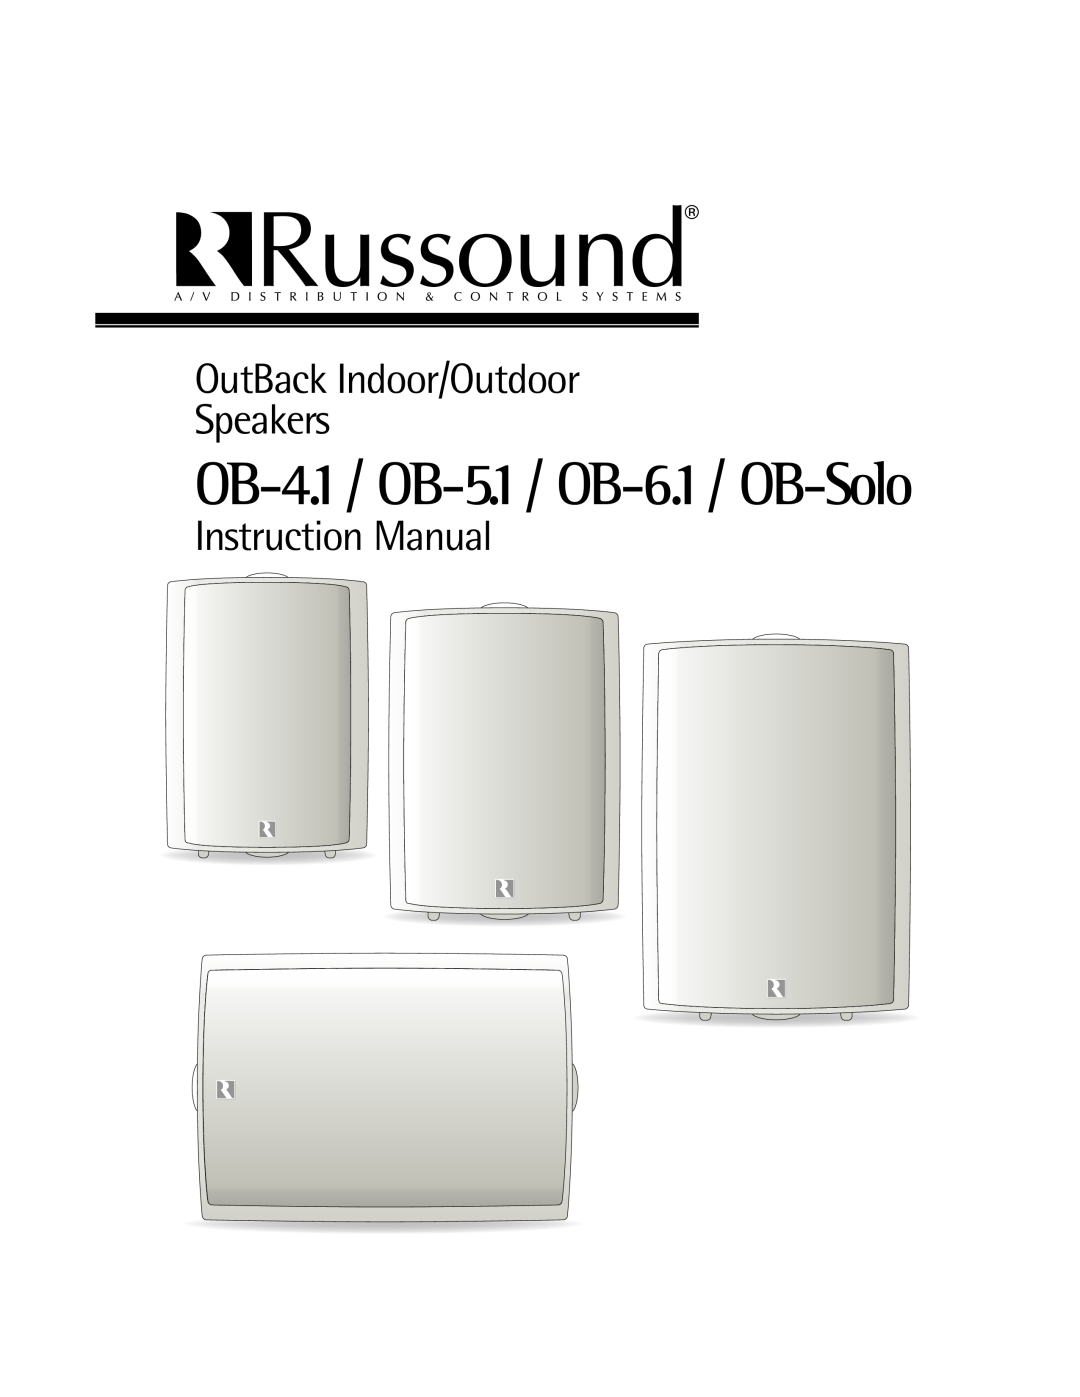 Russound instruction manual OB-4.1/ OB-5.1/ OB-6.1/ OB-Solo, OutBack Indoor/Outdoor Speakers, Instruction Manual 